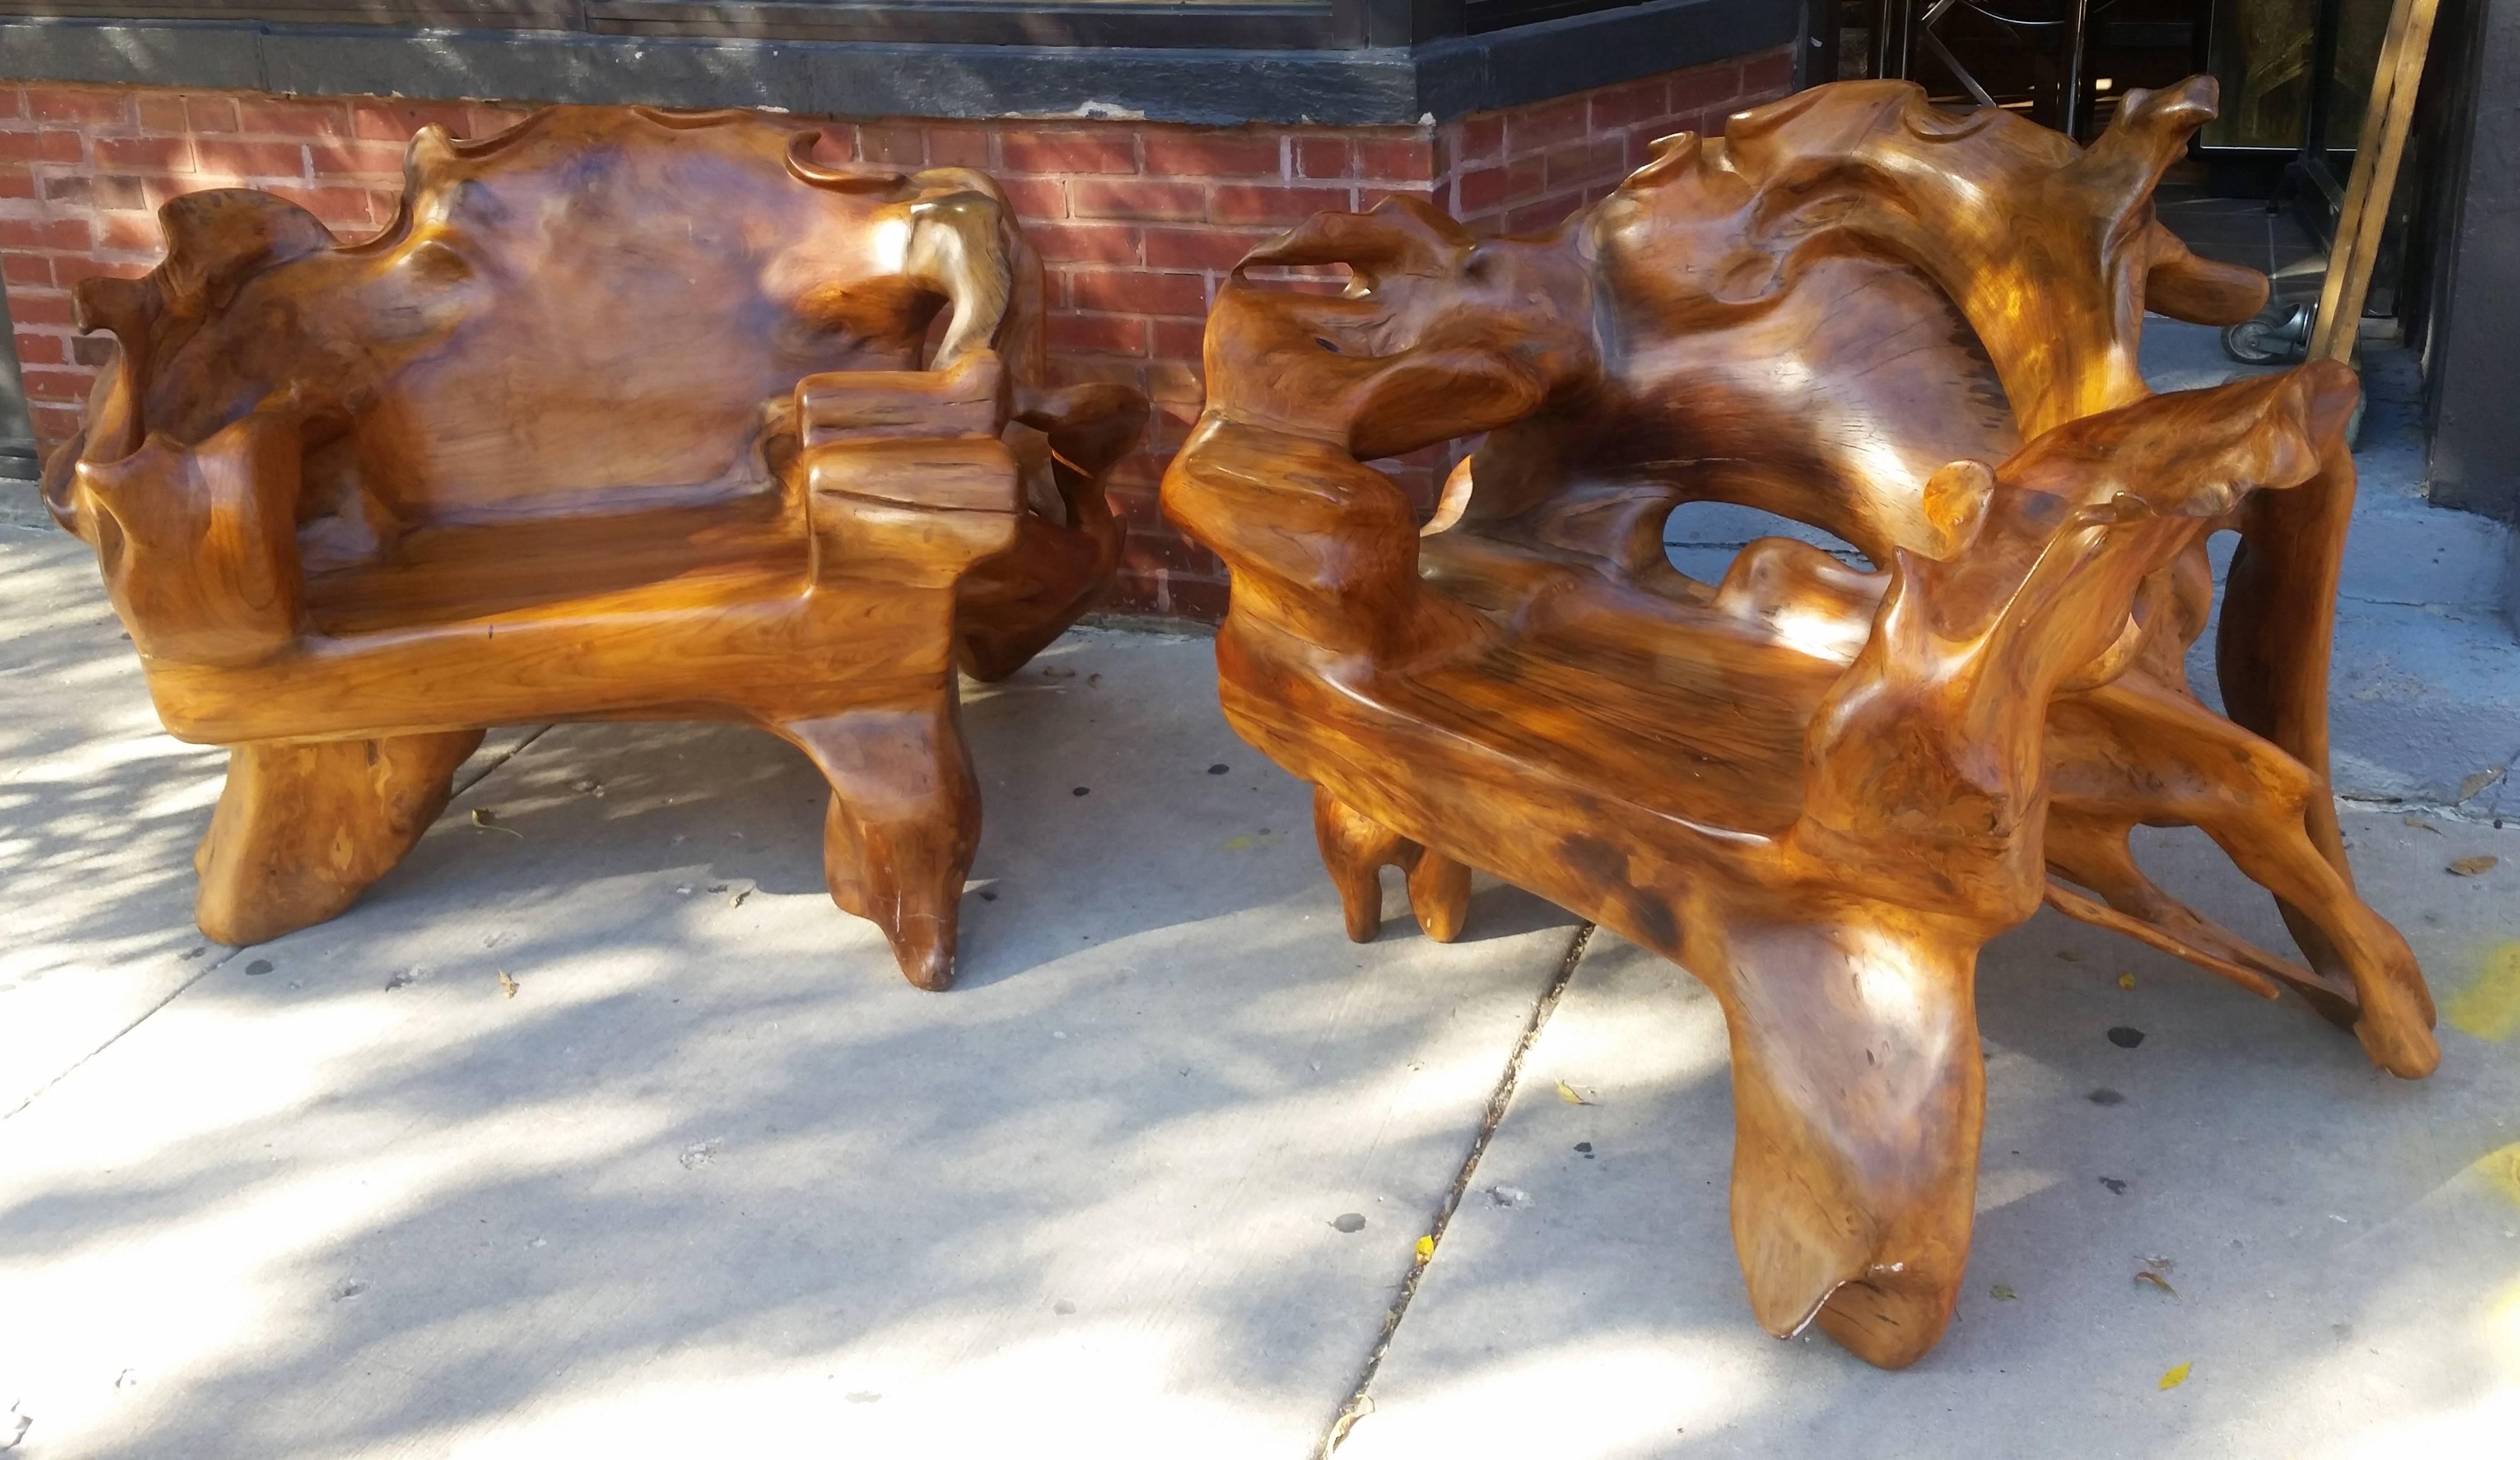 An exceptionally large one of a kind suite of highly sculptural American Studio Craft furniture.
Though unsigned these expertly handcrafted chairs and table were created by a master artisan. The monumental proportions are very much in the manner of